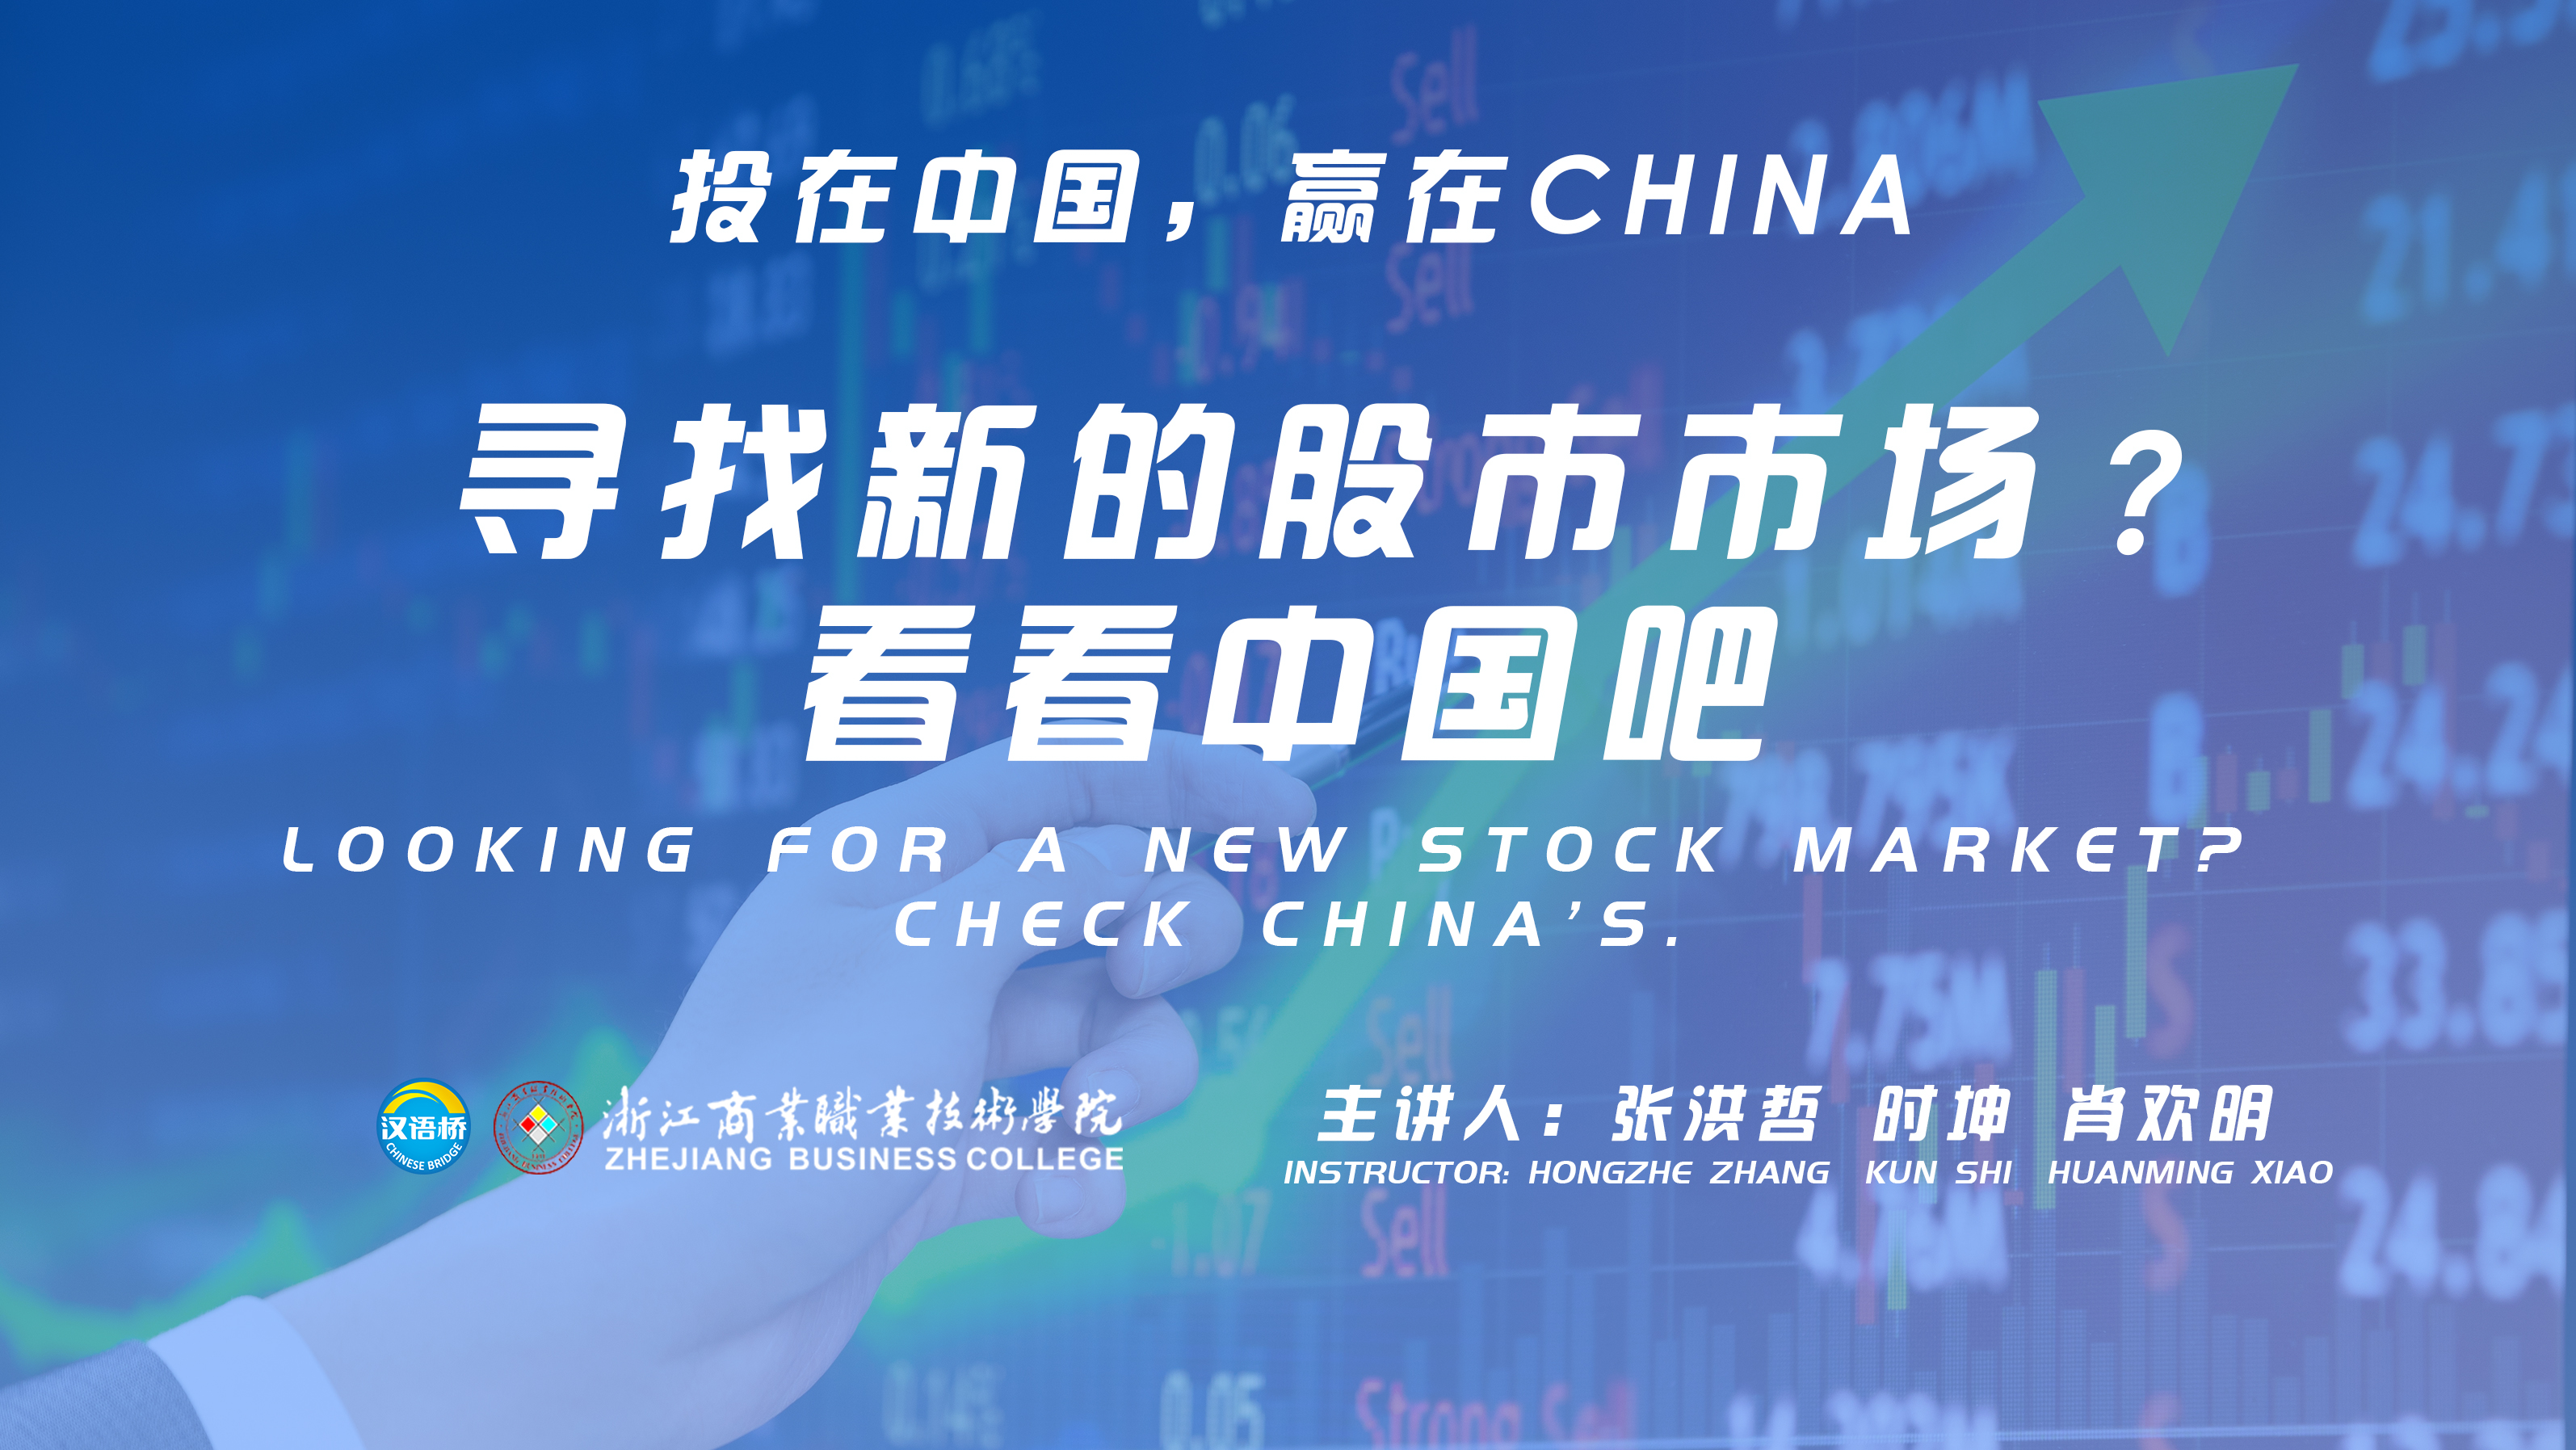 Looking for a new stock market? Check China’s.